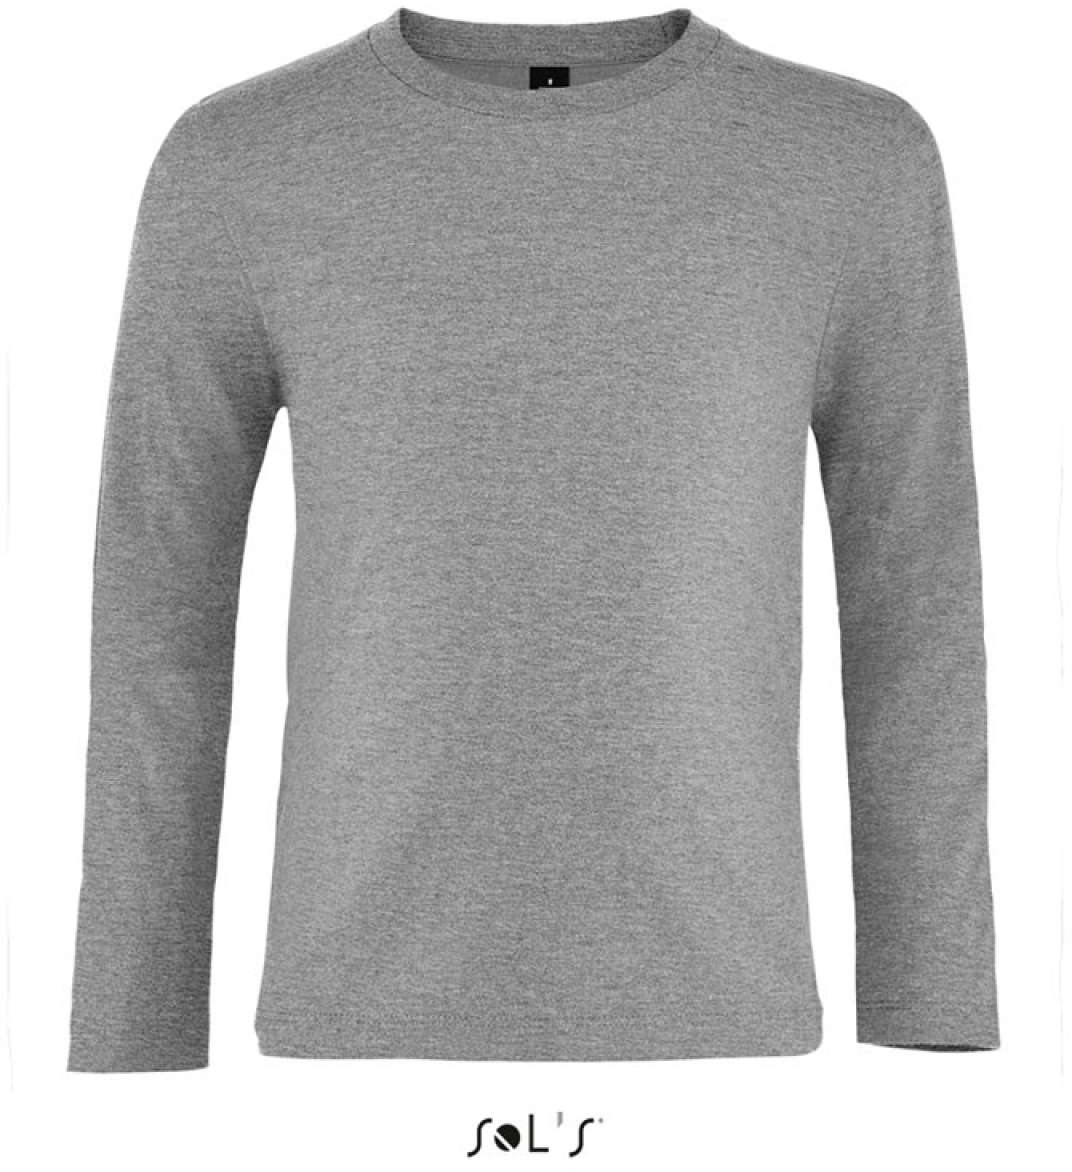 Sol's imperial Lsl Kids - Long Sleeve T-shirt - Sol's imperial Lsl Kids - Long Sleeve T-shirt - Sport Grey